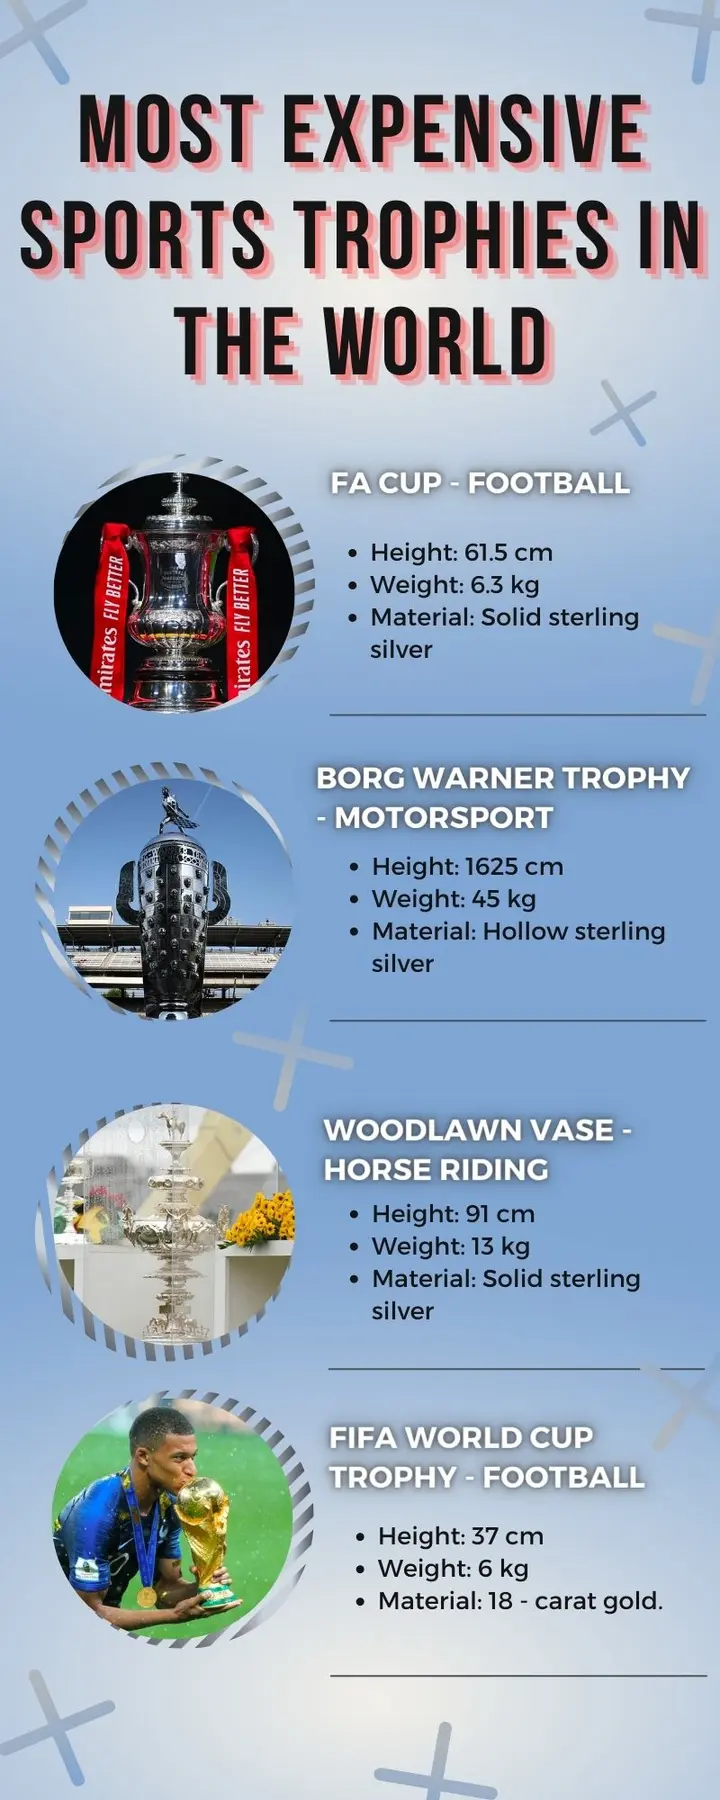 Most expensive sports trophies in the world right now